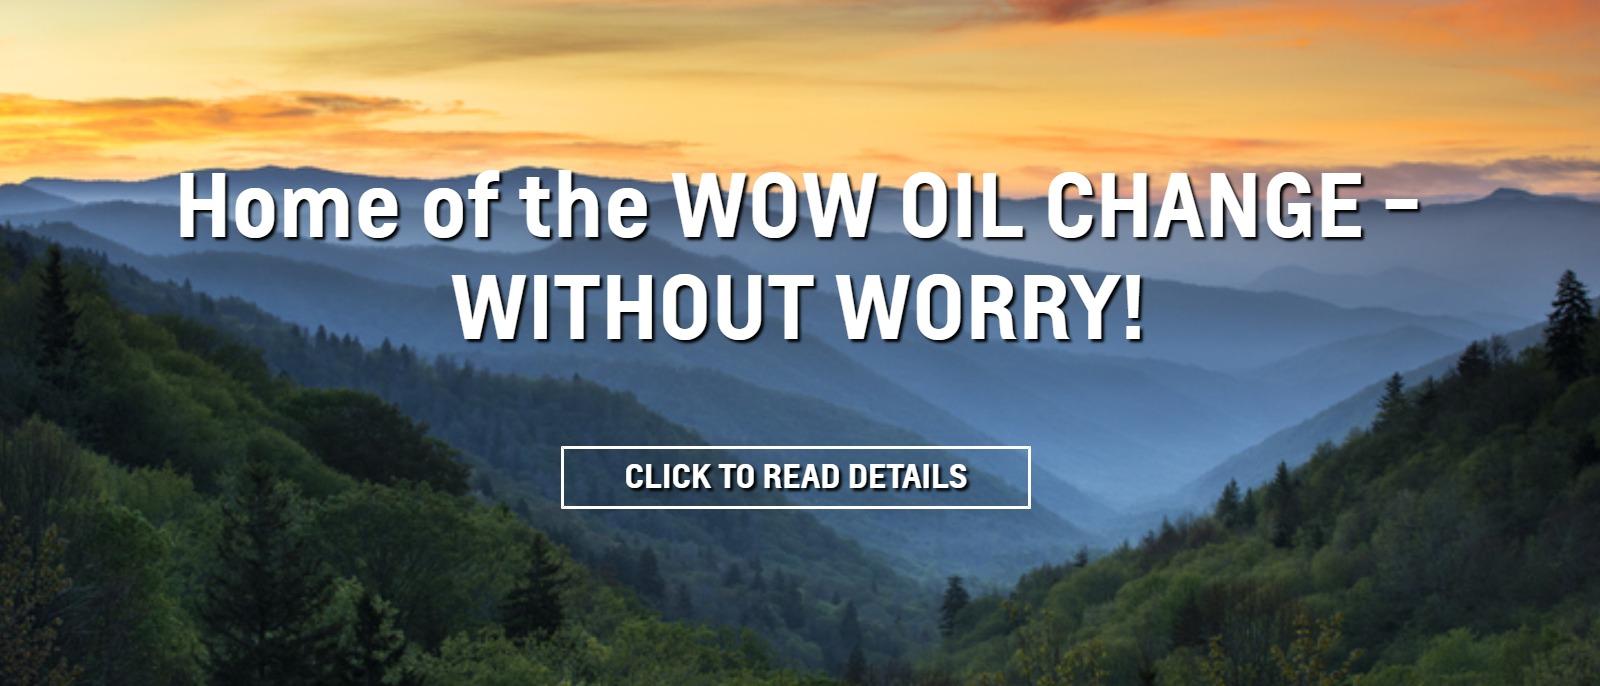 Home of the WOW OIL CHANGE - WITHOUT WORRY!